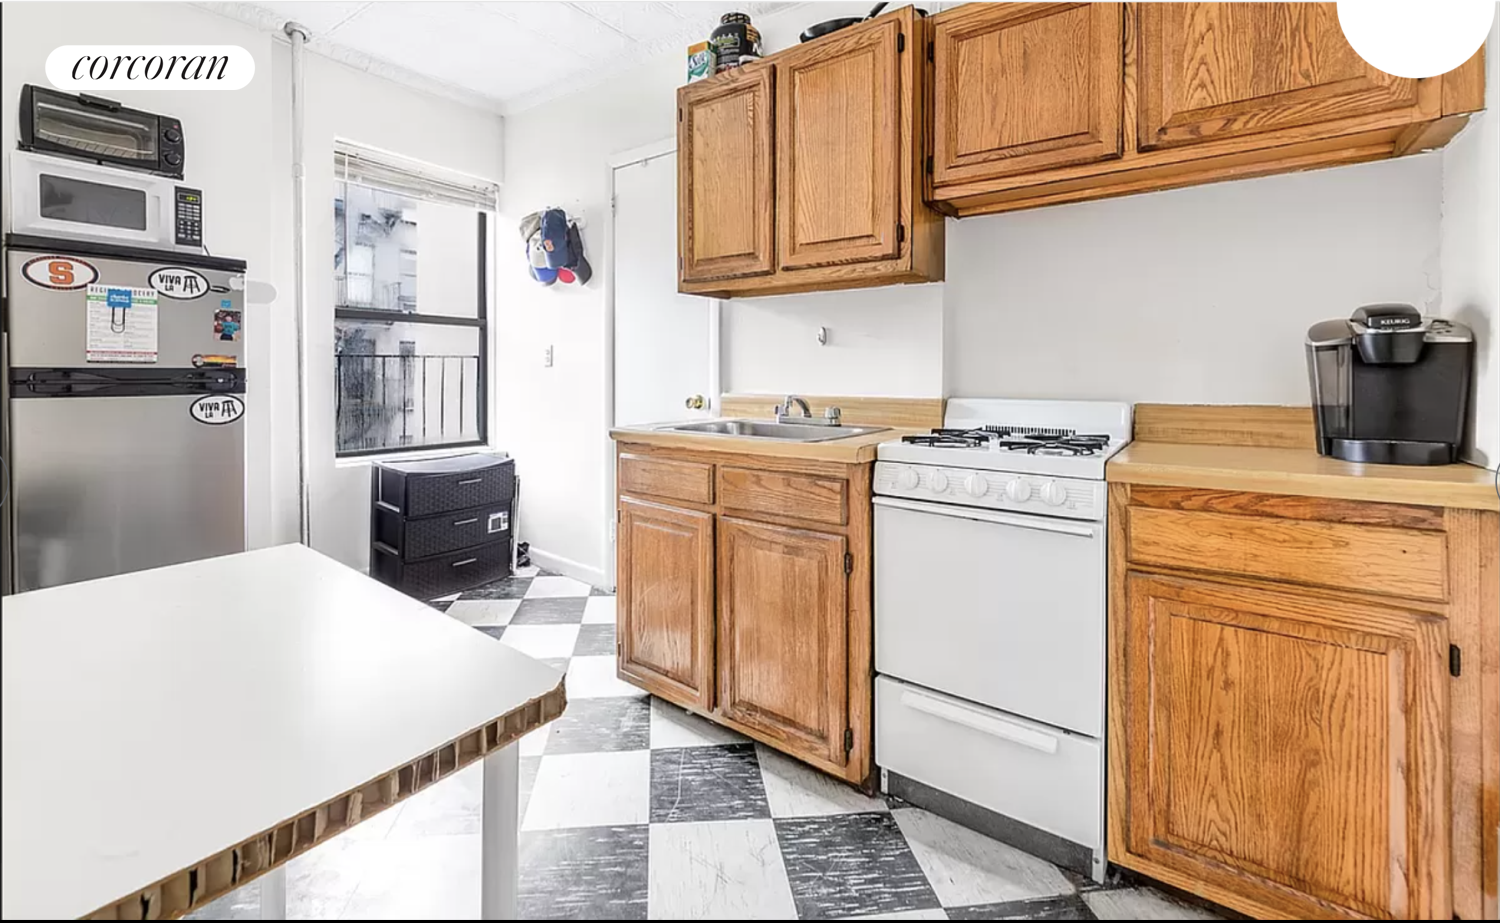 412 East 11th Street 4R, East Village, Downtown, NYC - 2 Bedrooms  
1 Bathrooms  
4 Rooms - 